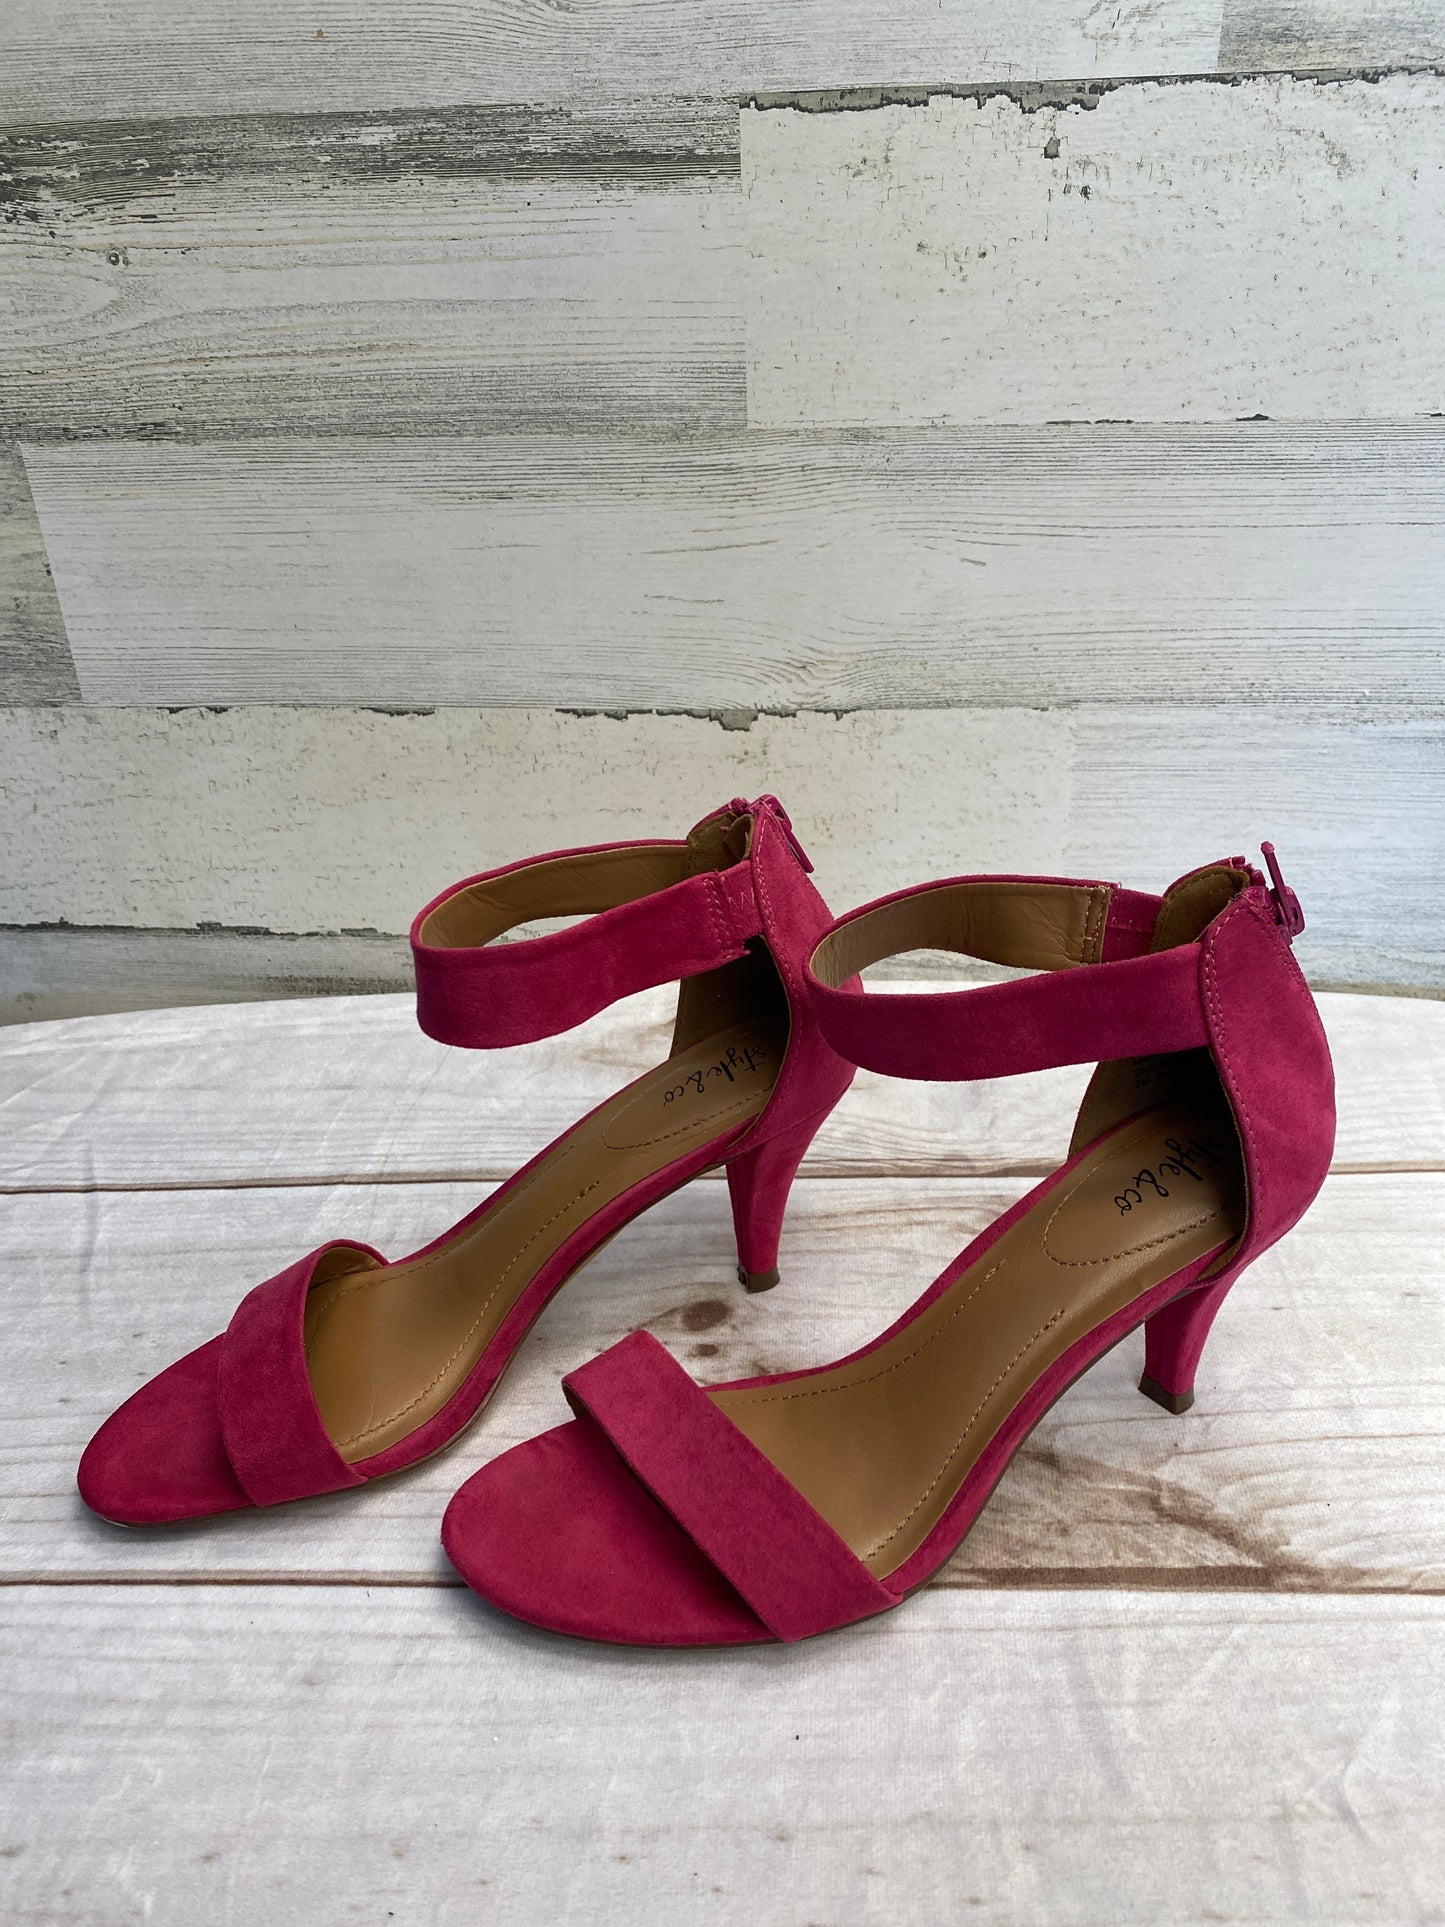 Pink Sandals Heels Stiletto Style And Company, Size 7